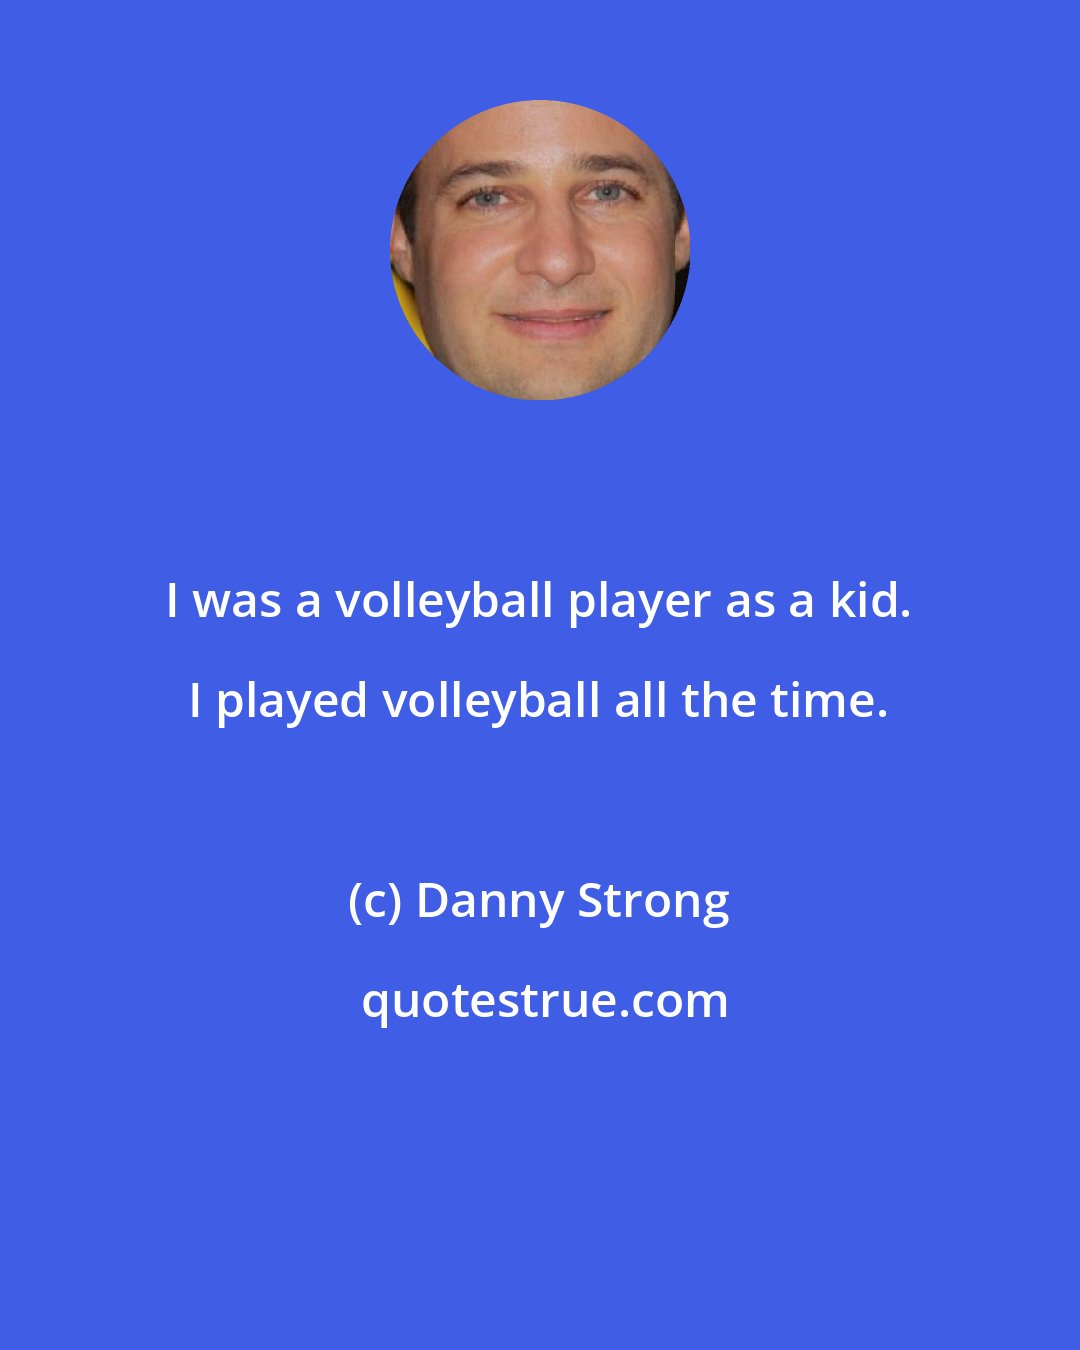 Danny Strong: I was a volleyball player as a kid. I played volleyball all the time.